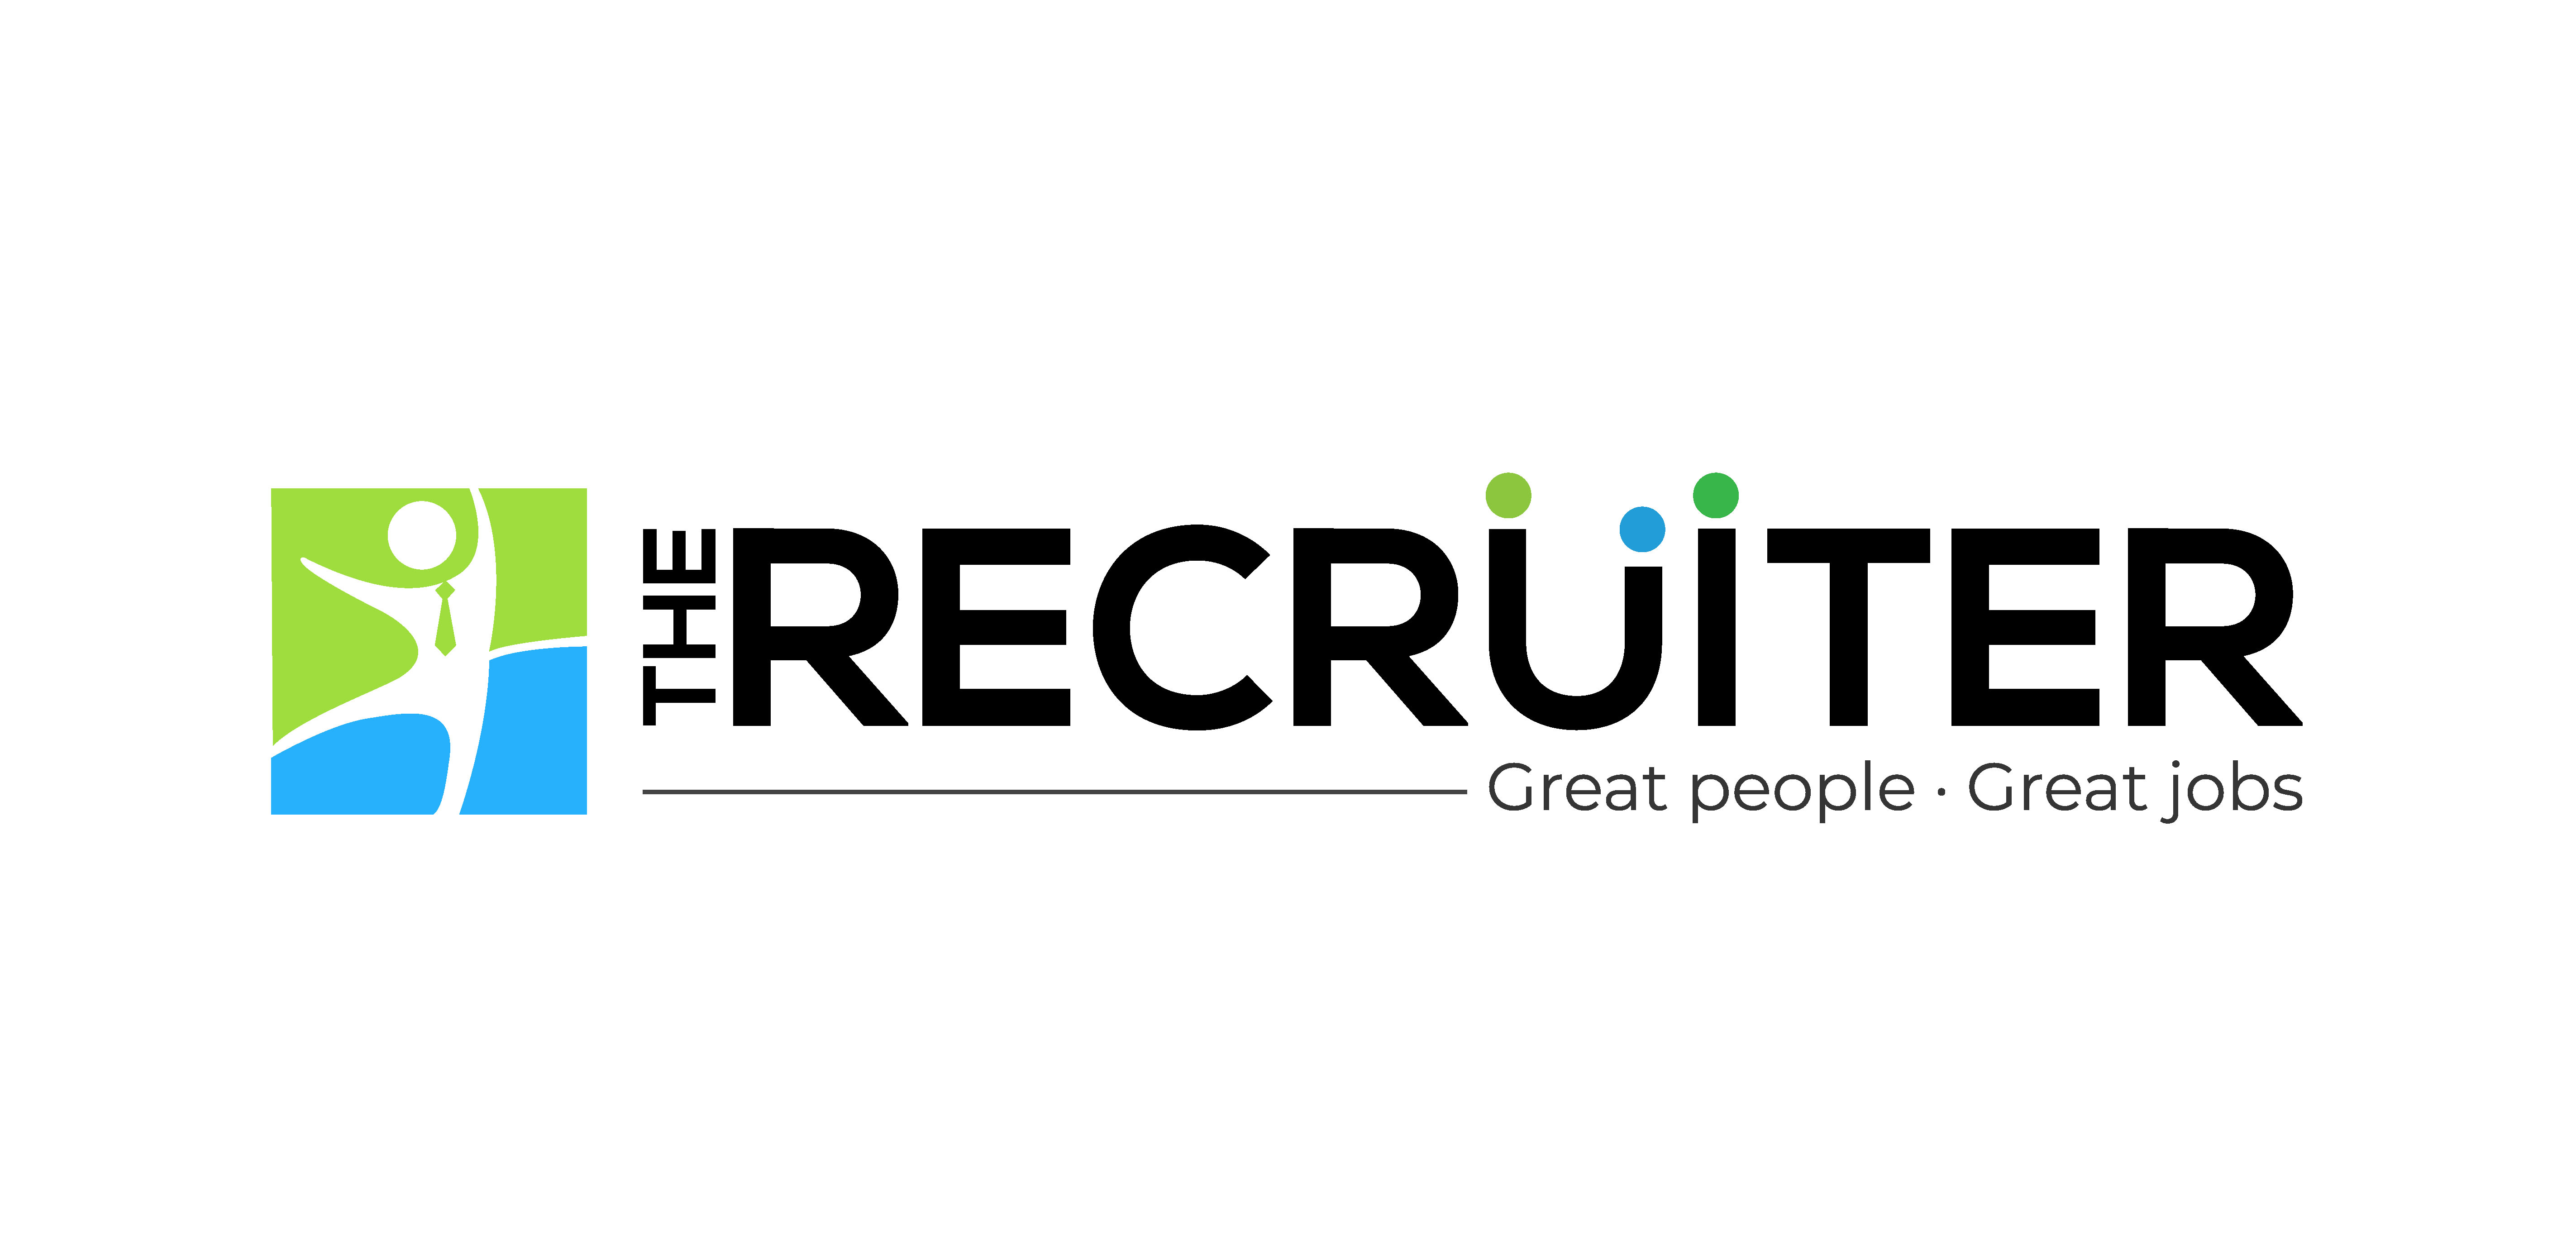 Best Recruitment Agency Malaysia - The Recruiter